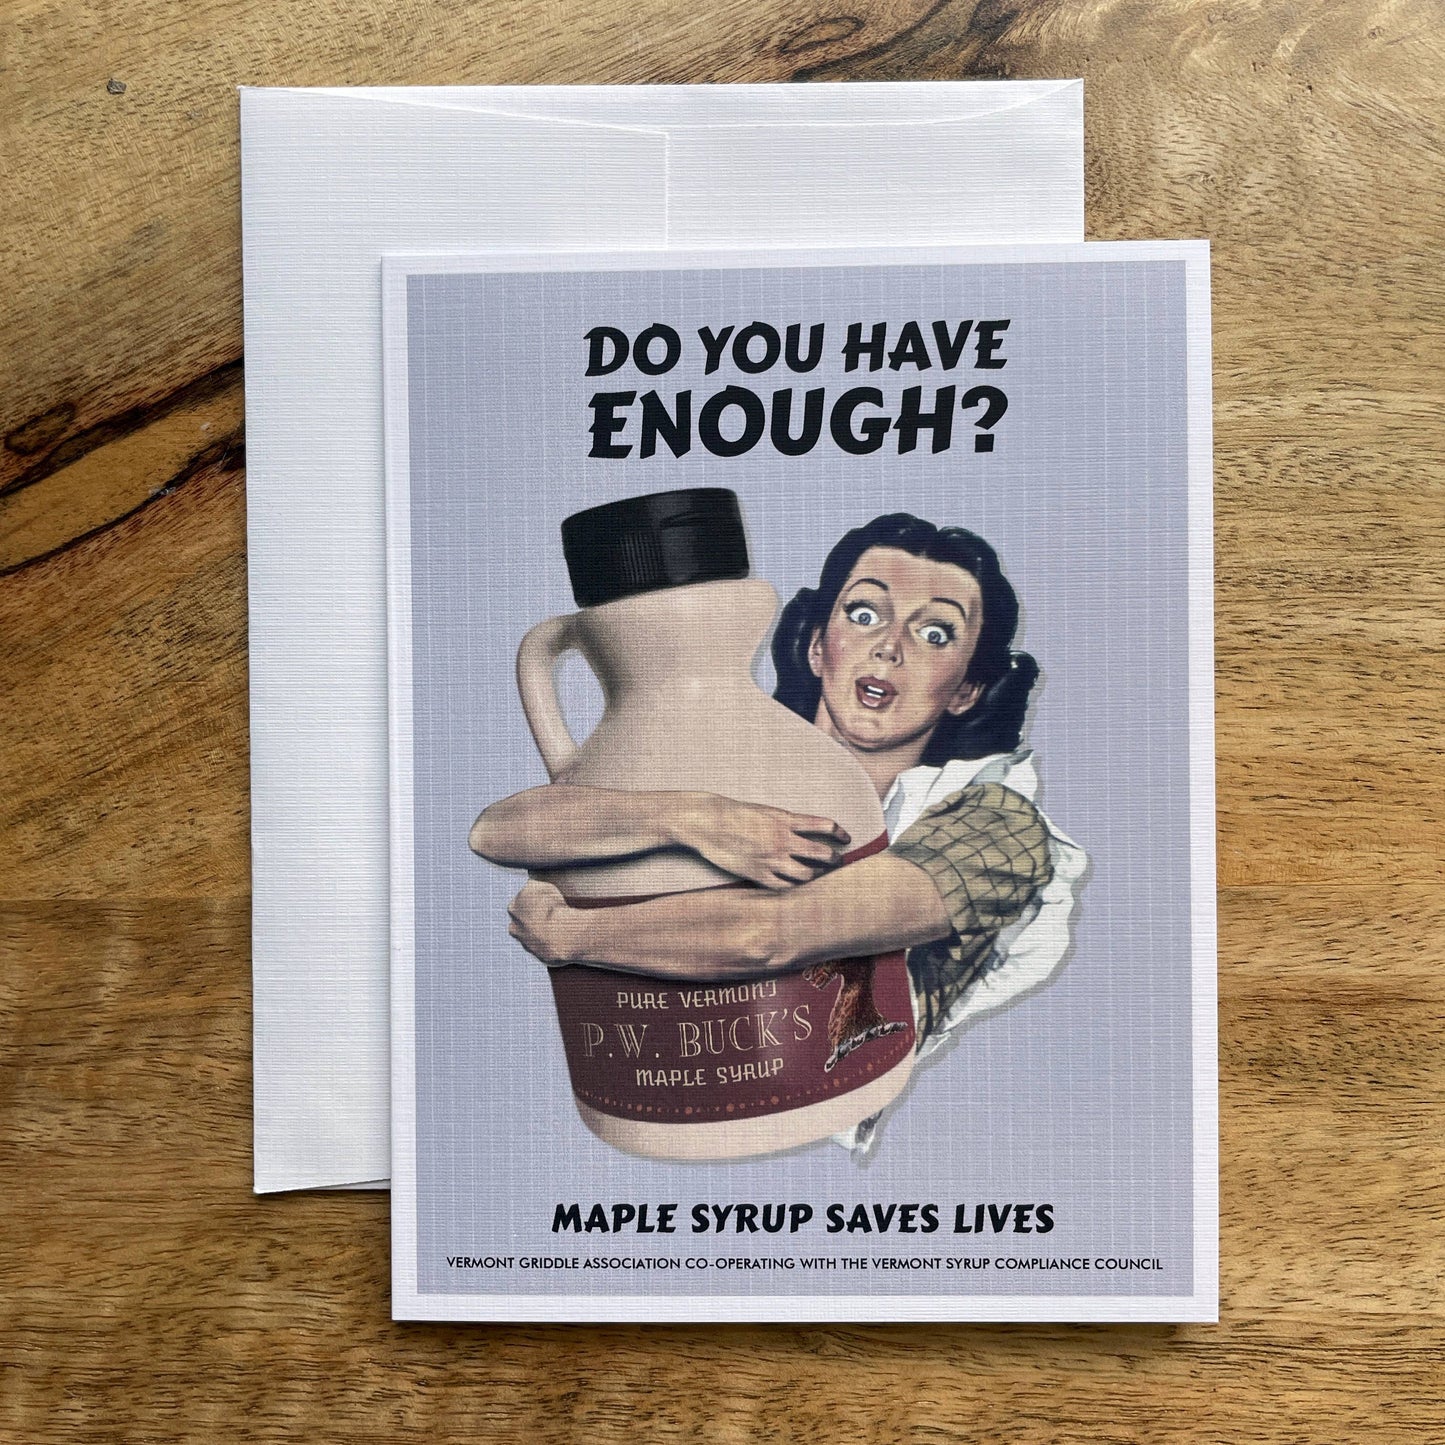 Enough Maple Syrup? funny greeting card